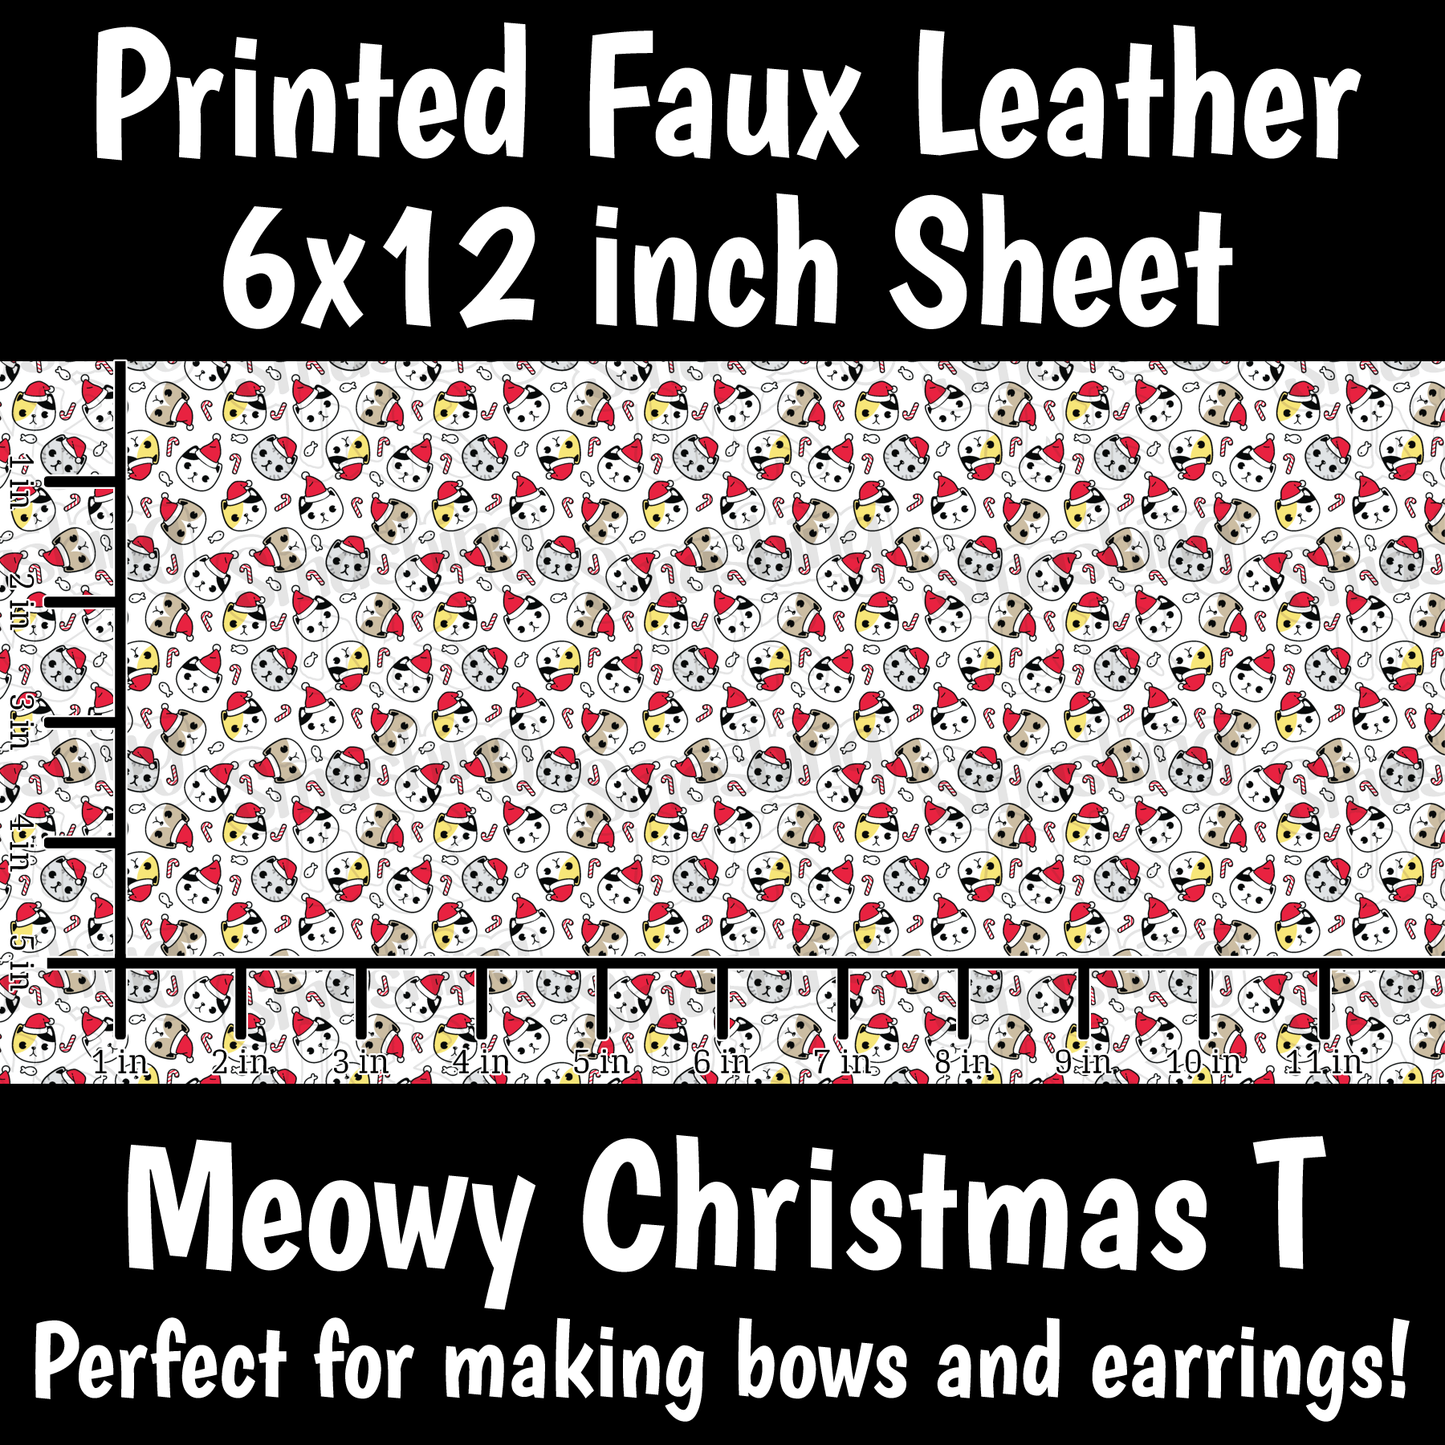 Meowy Christmas T - Faux Leather Sheet (SHIPS IN 3 BUS DAYS)